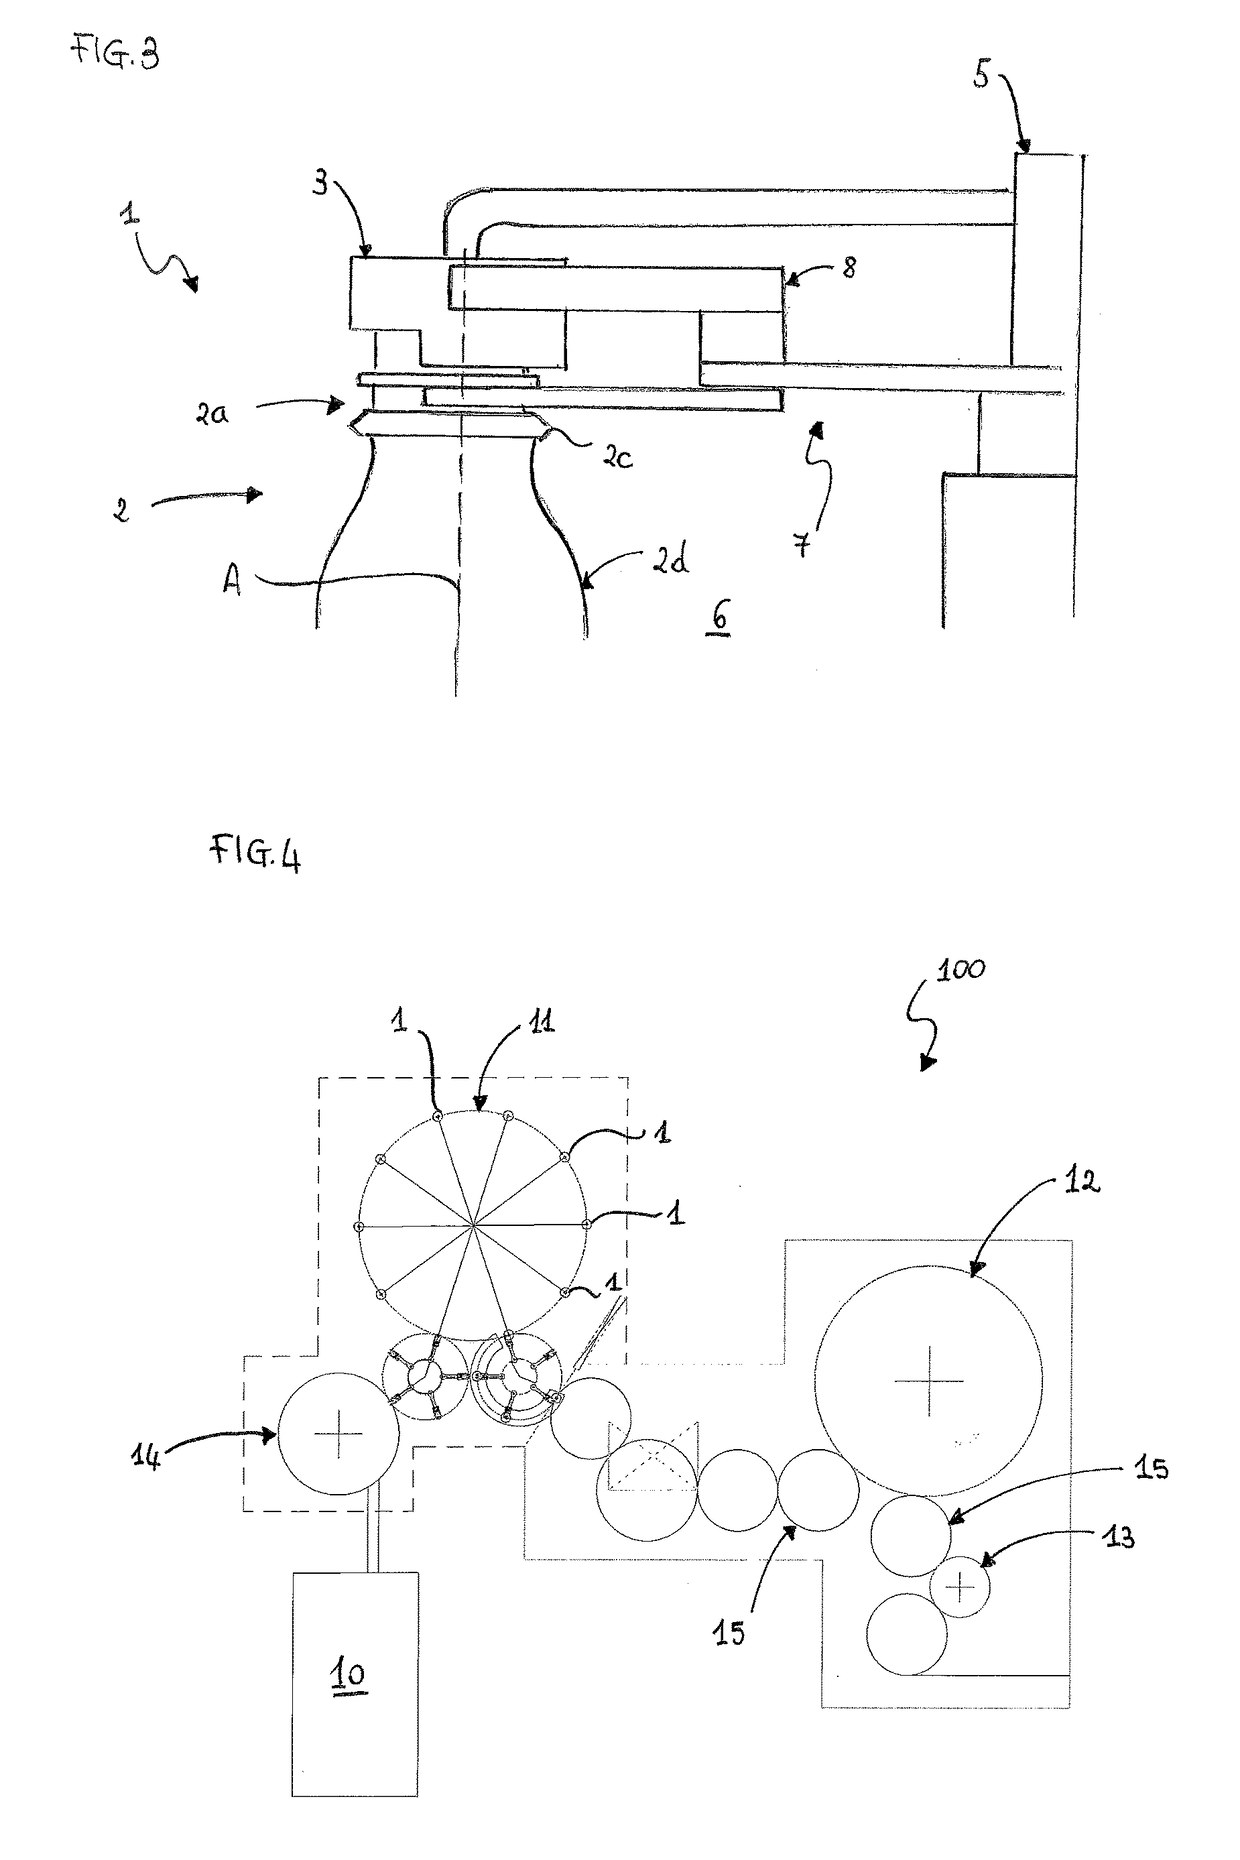 Process station for a parison or a container made of thermoplastic material, apparatus for processing parisons or containers, production and packaging line for producing and packaging the containers and method for producing and packaging containers